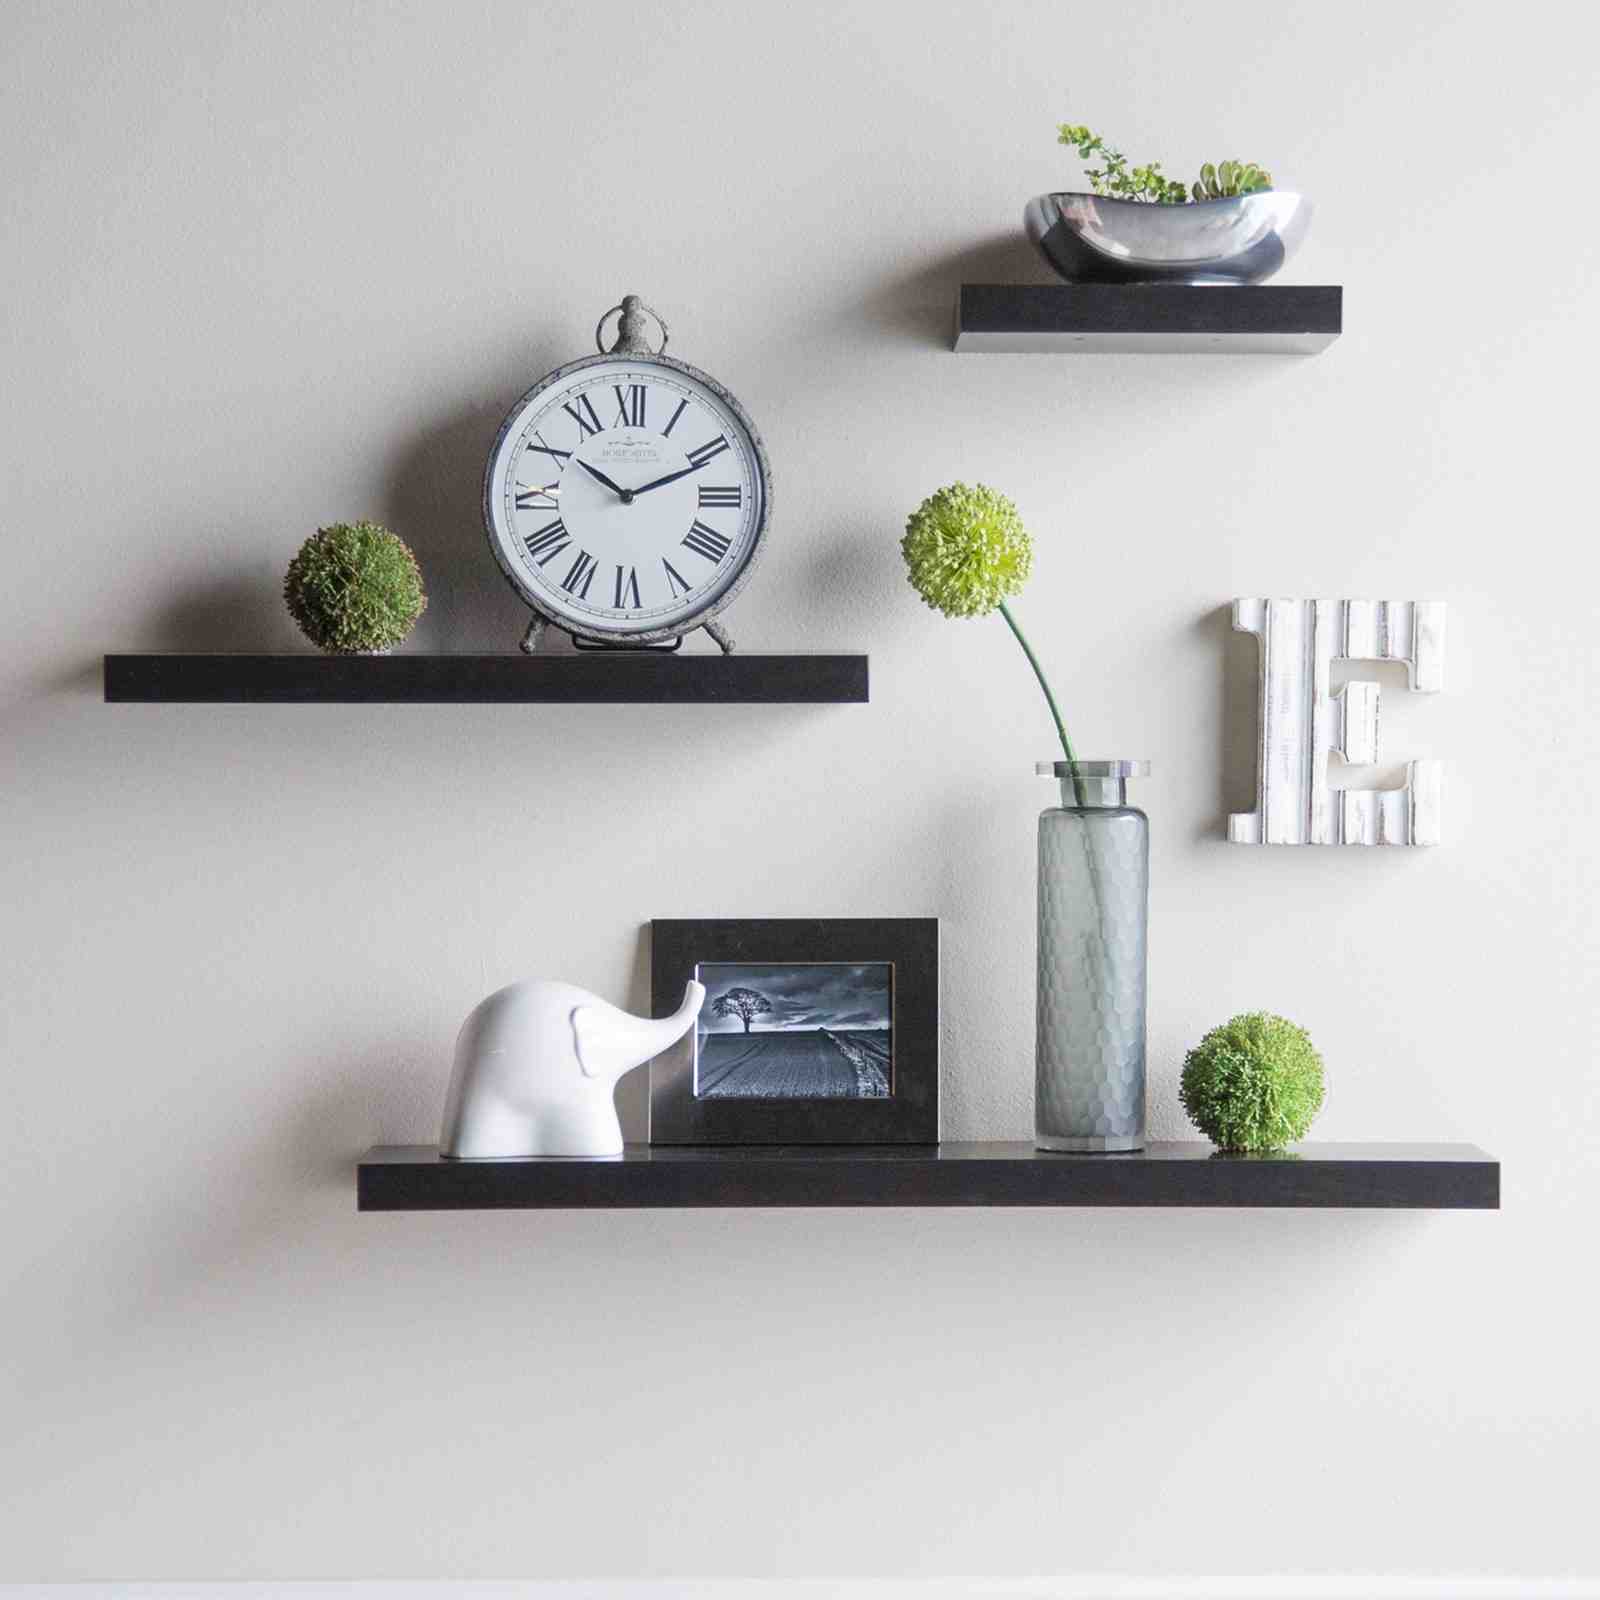 Floating Wall Shelves: Extra Storage and Display Like ... on What To Put On Decorative Wall Sconces Shelves id=96047